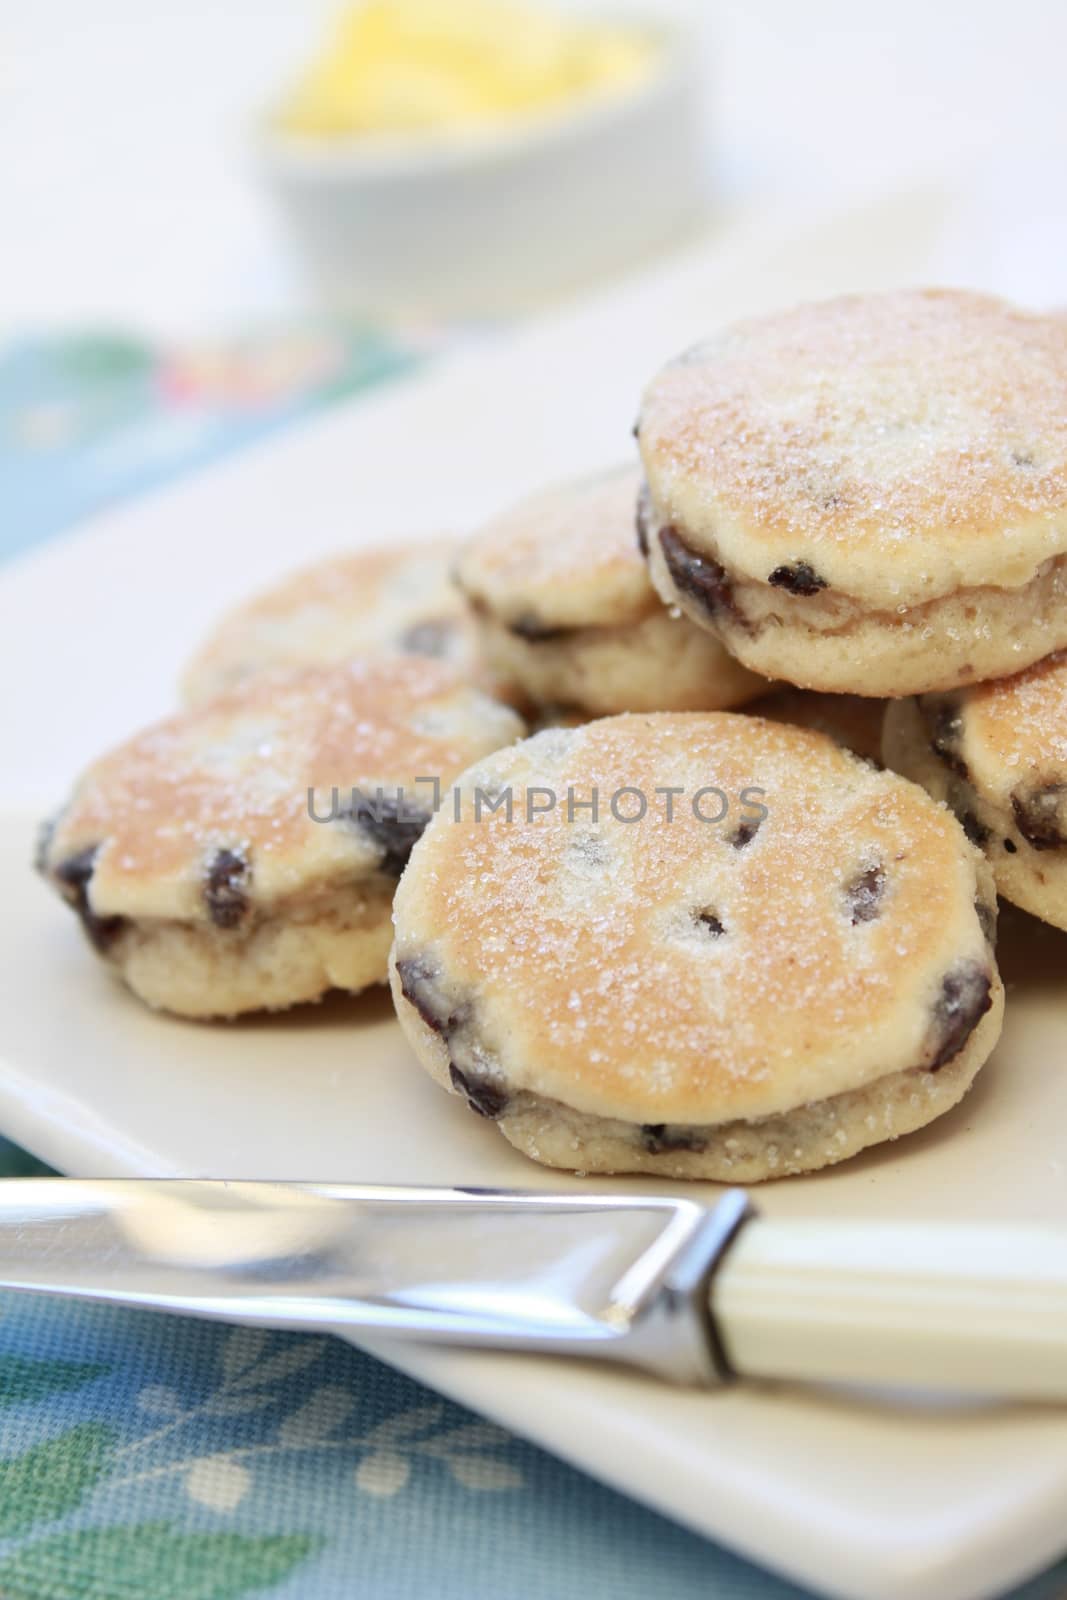 welsh cakes by neil_langan